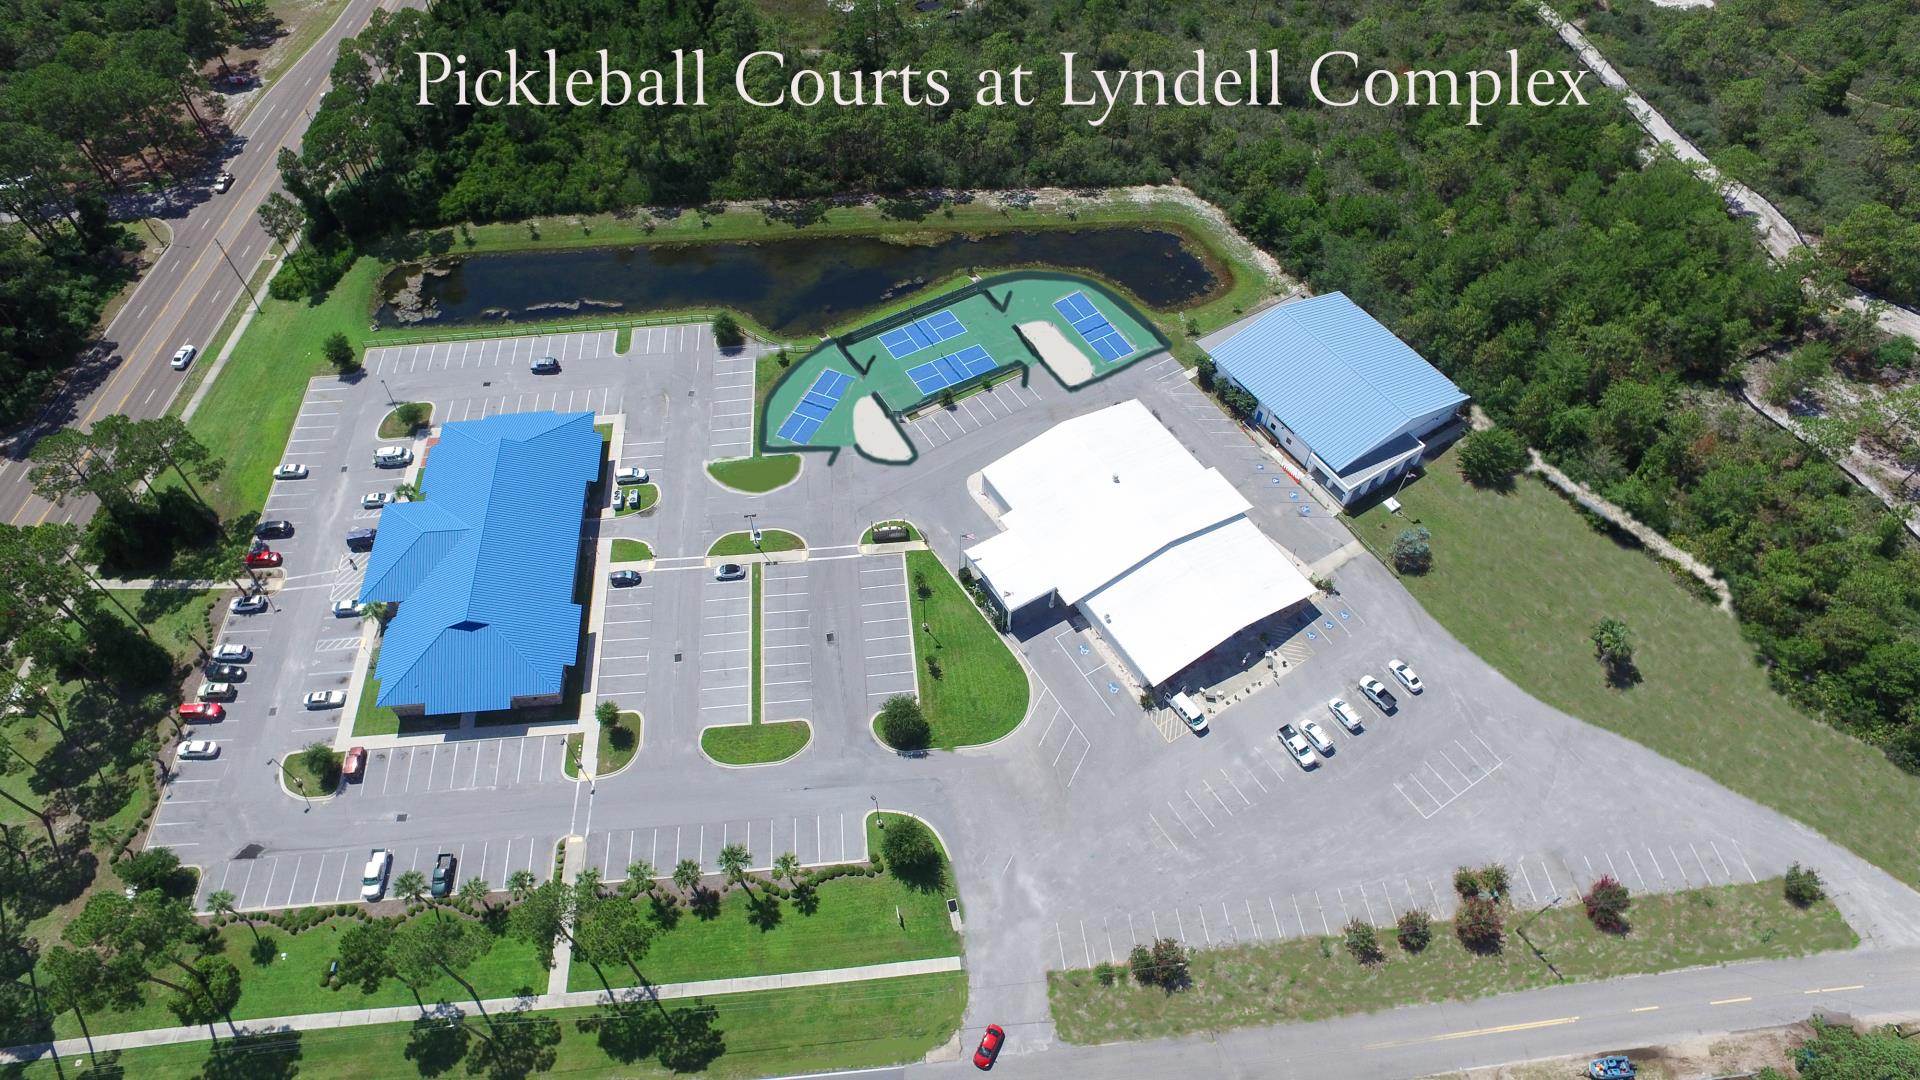 4 Pickleball Courts at Lyndell Complex